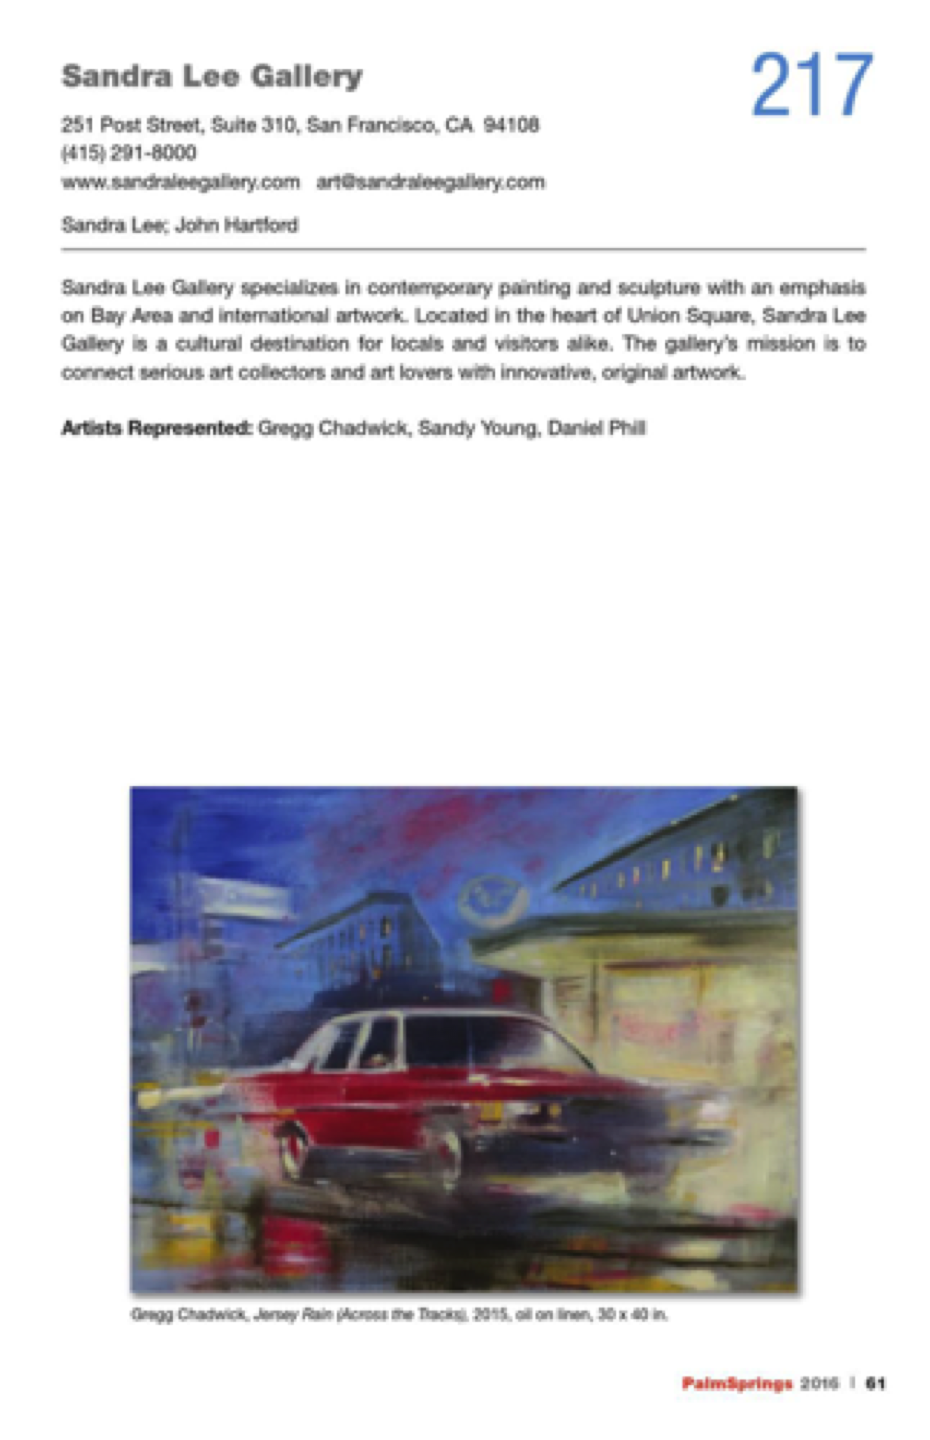 IA selection of Gregg Chadwick’s paintings from the Mystery Train series was exhibited at the Palm Springs Fine Art Fair from February 11-14, 2016 in the Sandra Lee Gallery booth. Gregg spoke at the Fair on February 12, 2016. Jersey Rain (Across the Tracks) was illustrated in the catalog and Gregg’s talk was featured.